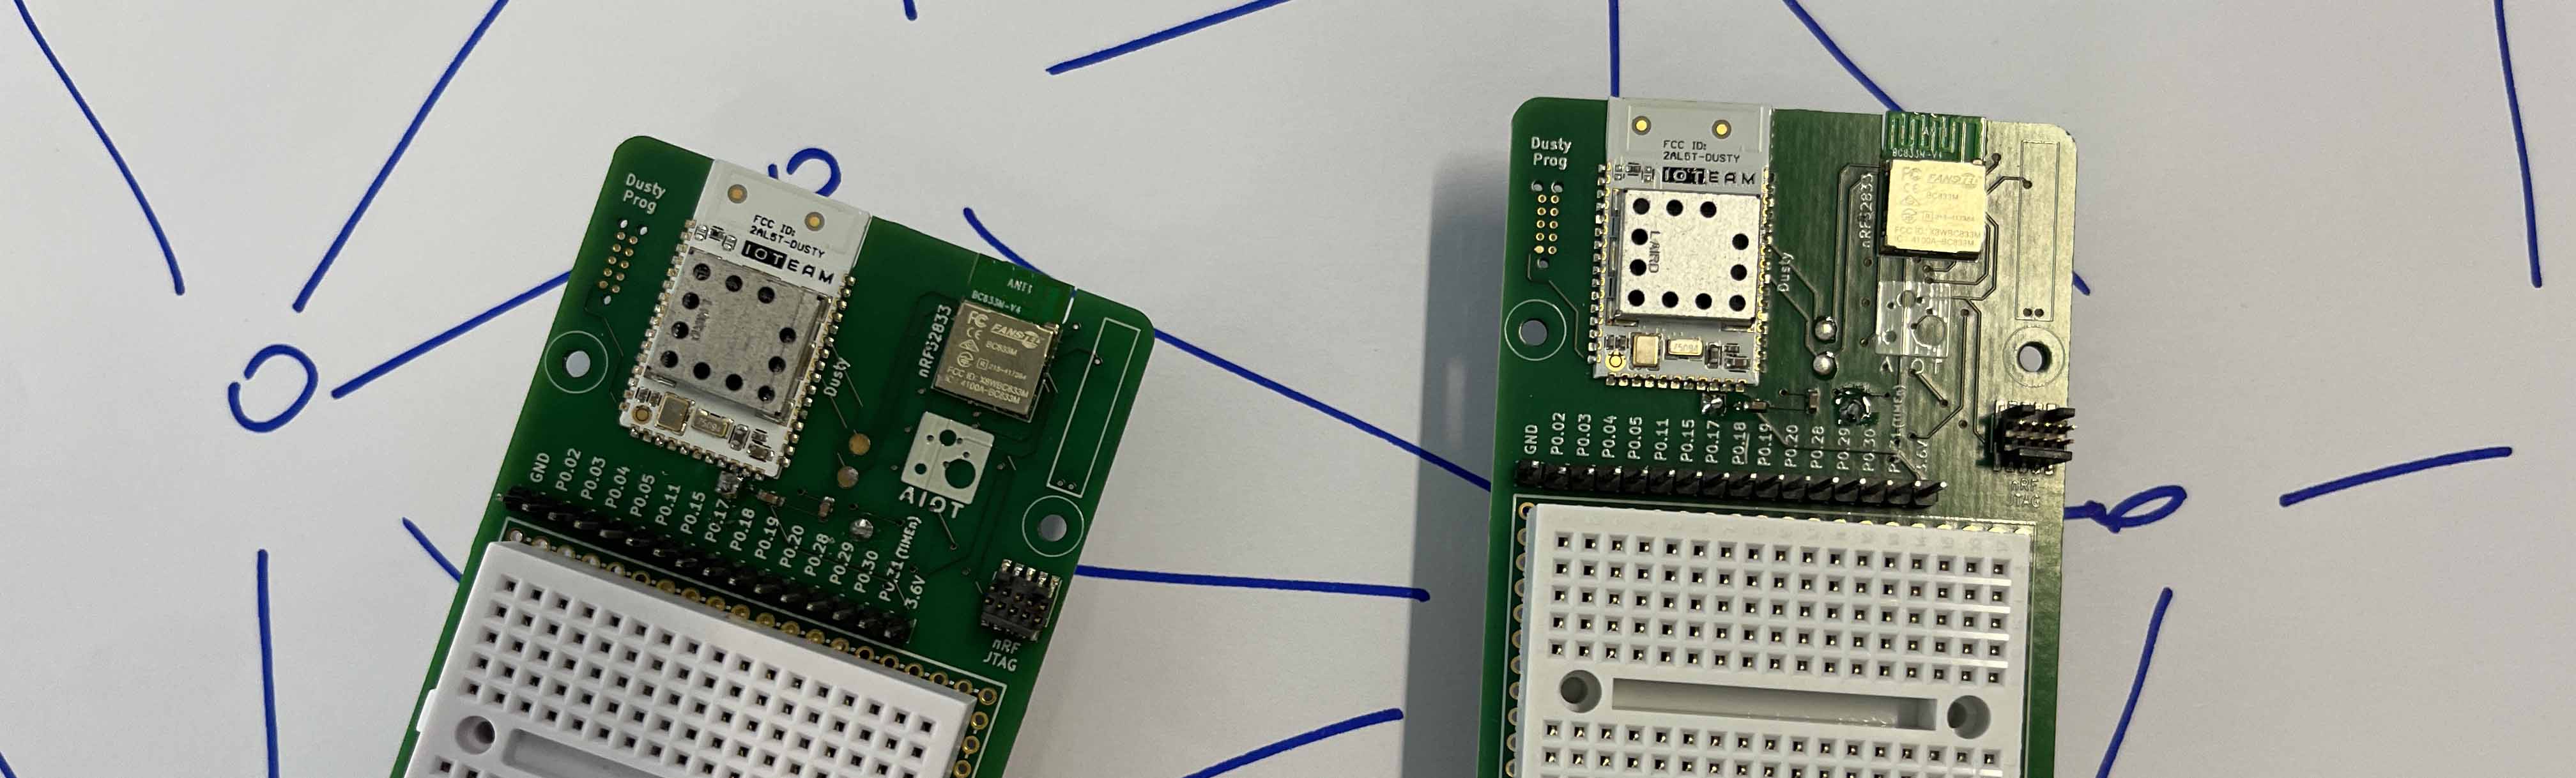 one-stop shop for learning embedded low-power wireless